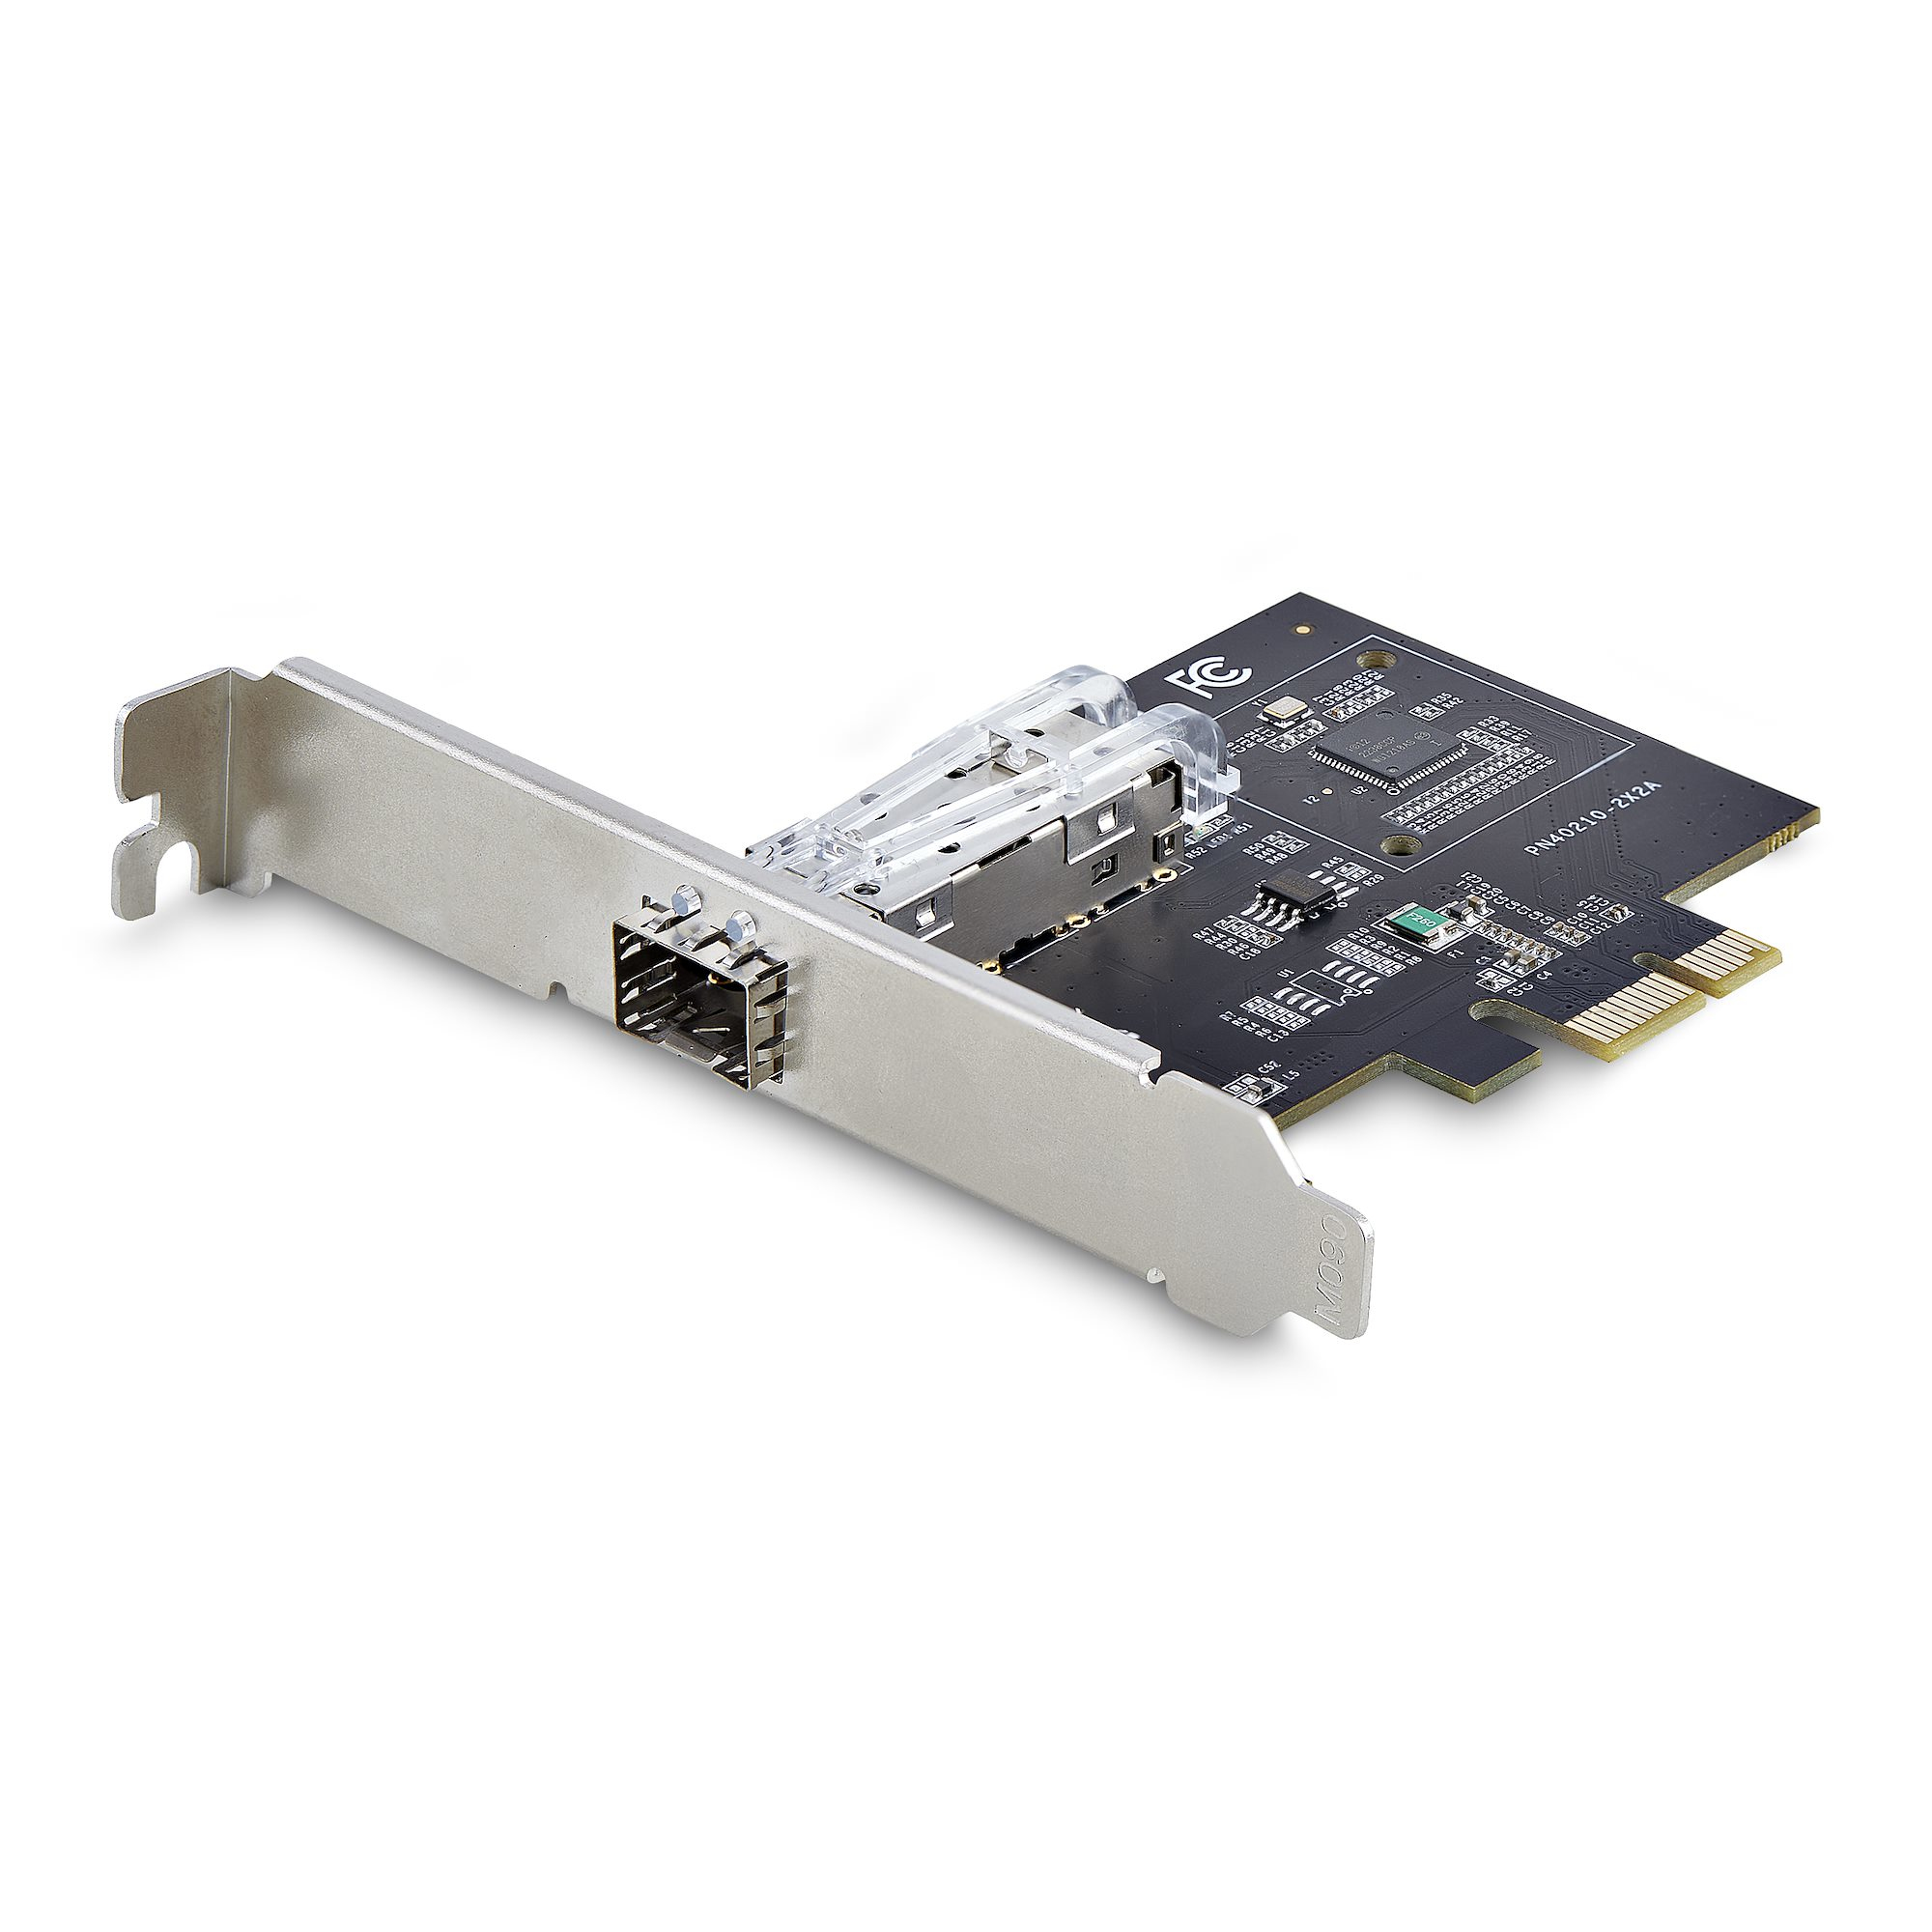 1-PORT GBE SFP NETWORK CARD, PCIE 2.1 X1, INTEL I210-IS, 1GBE CONTROLLER, 1000BA